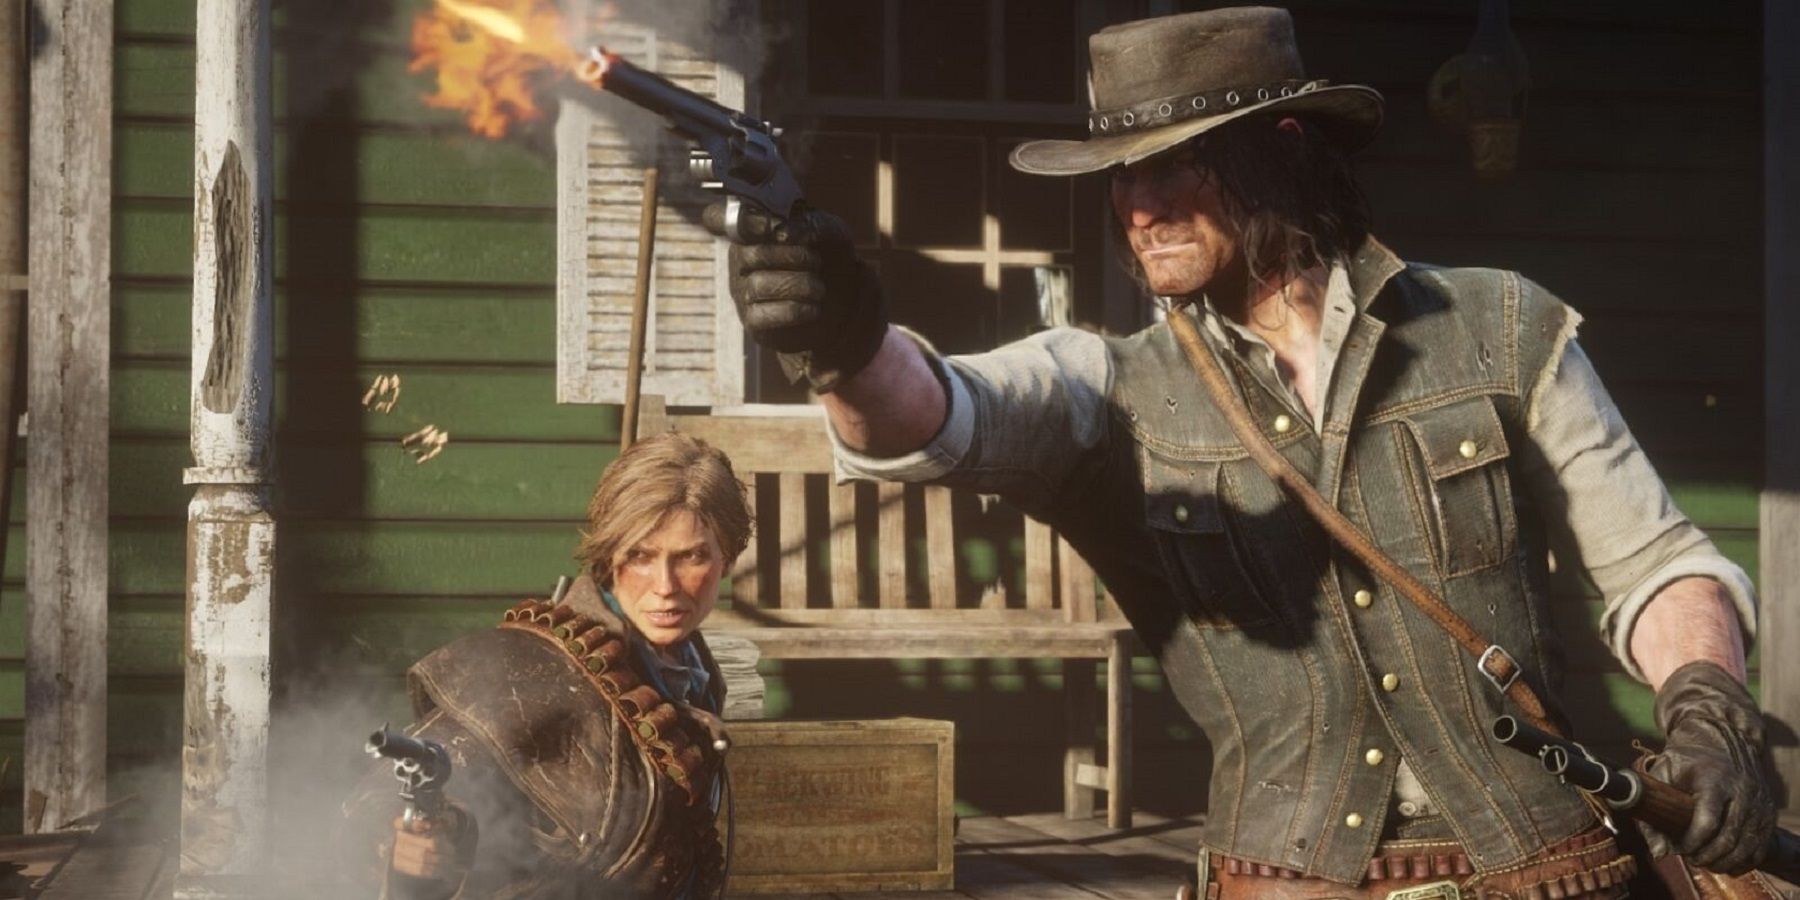 The clip shows a Red Dead Redemption 2 player pull off a two-for-one shot like their in a classic Western.